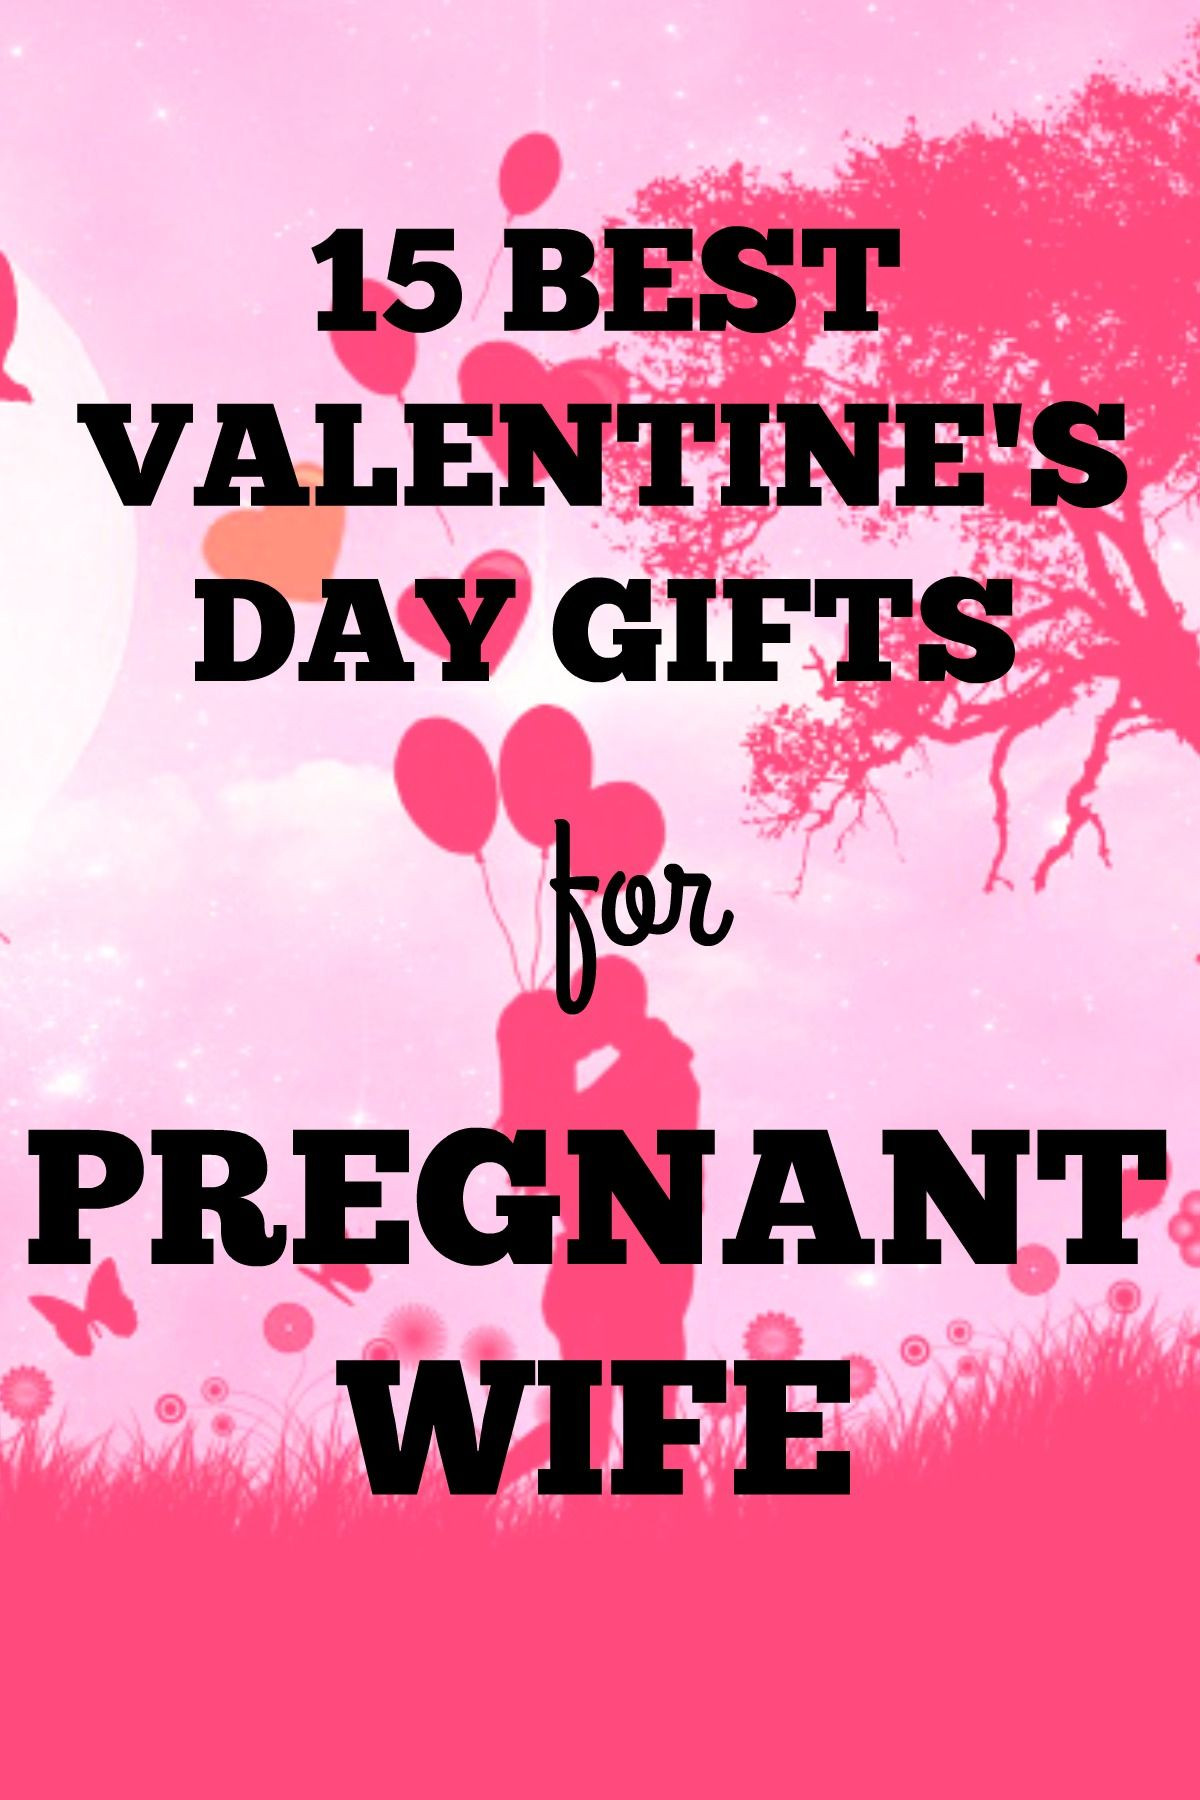 Valentines Gift Ideas For Pregnant Wife
 Best Valentines Day Gifts for Pregnant Wife